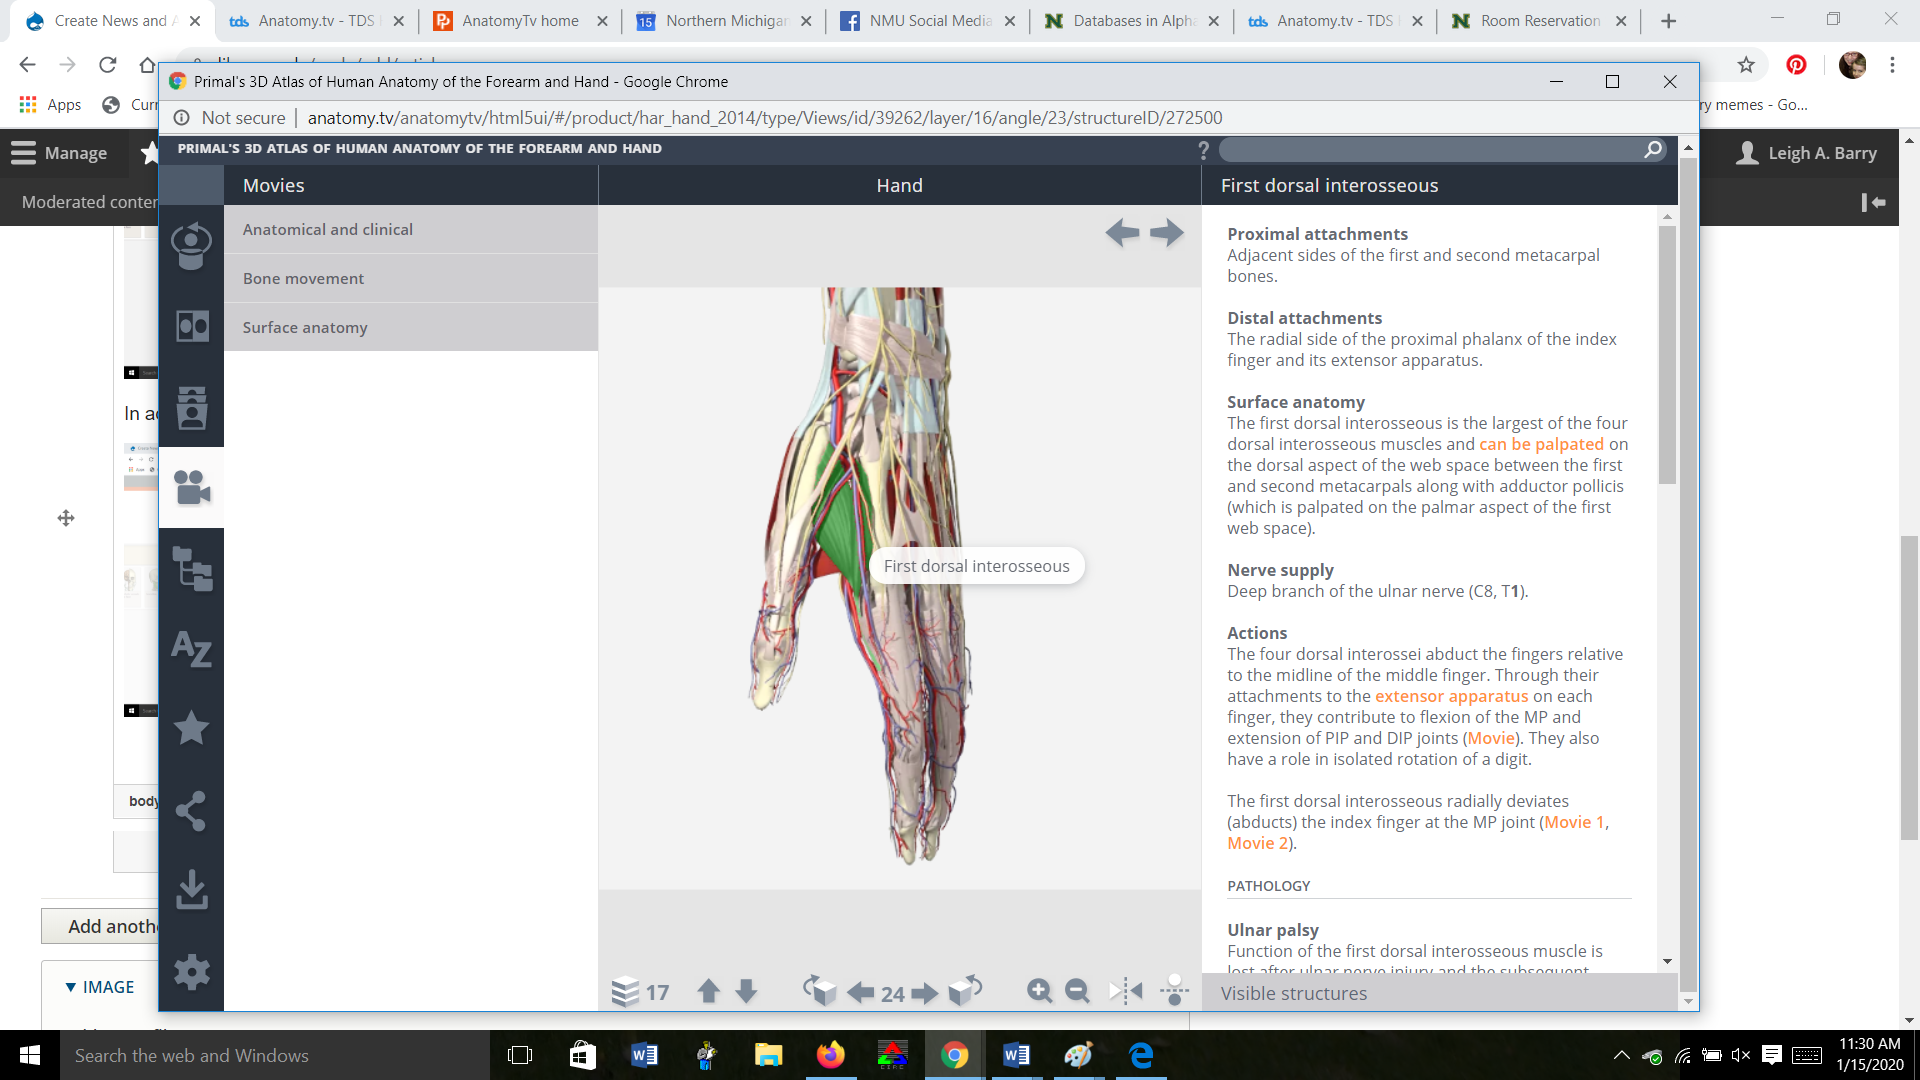 Image detail of Anatomy.TV webpage featuring a human hand